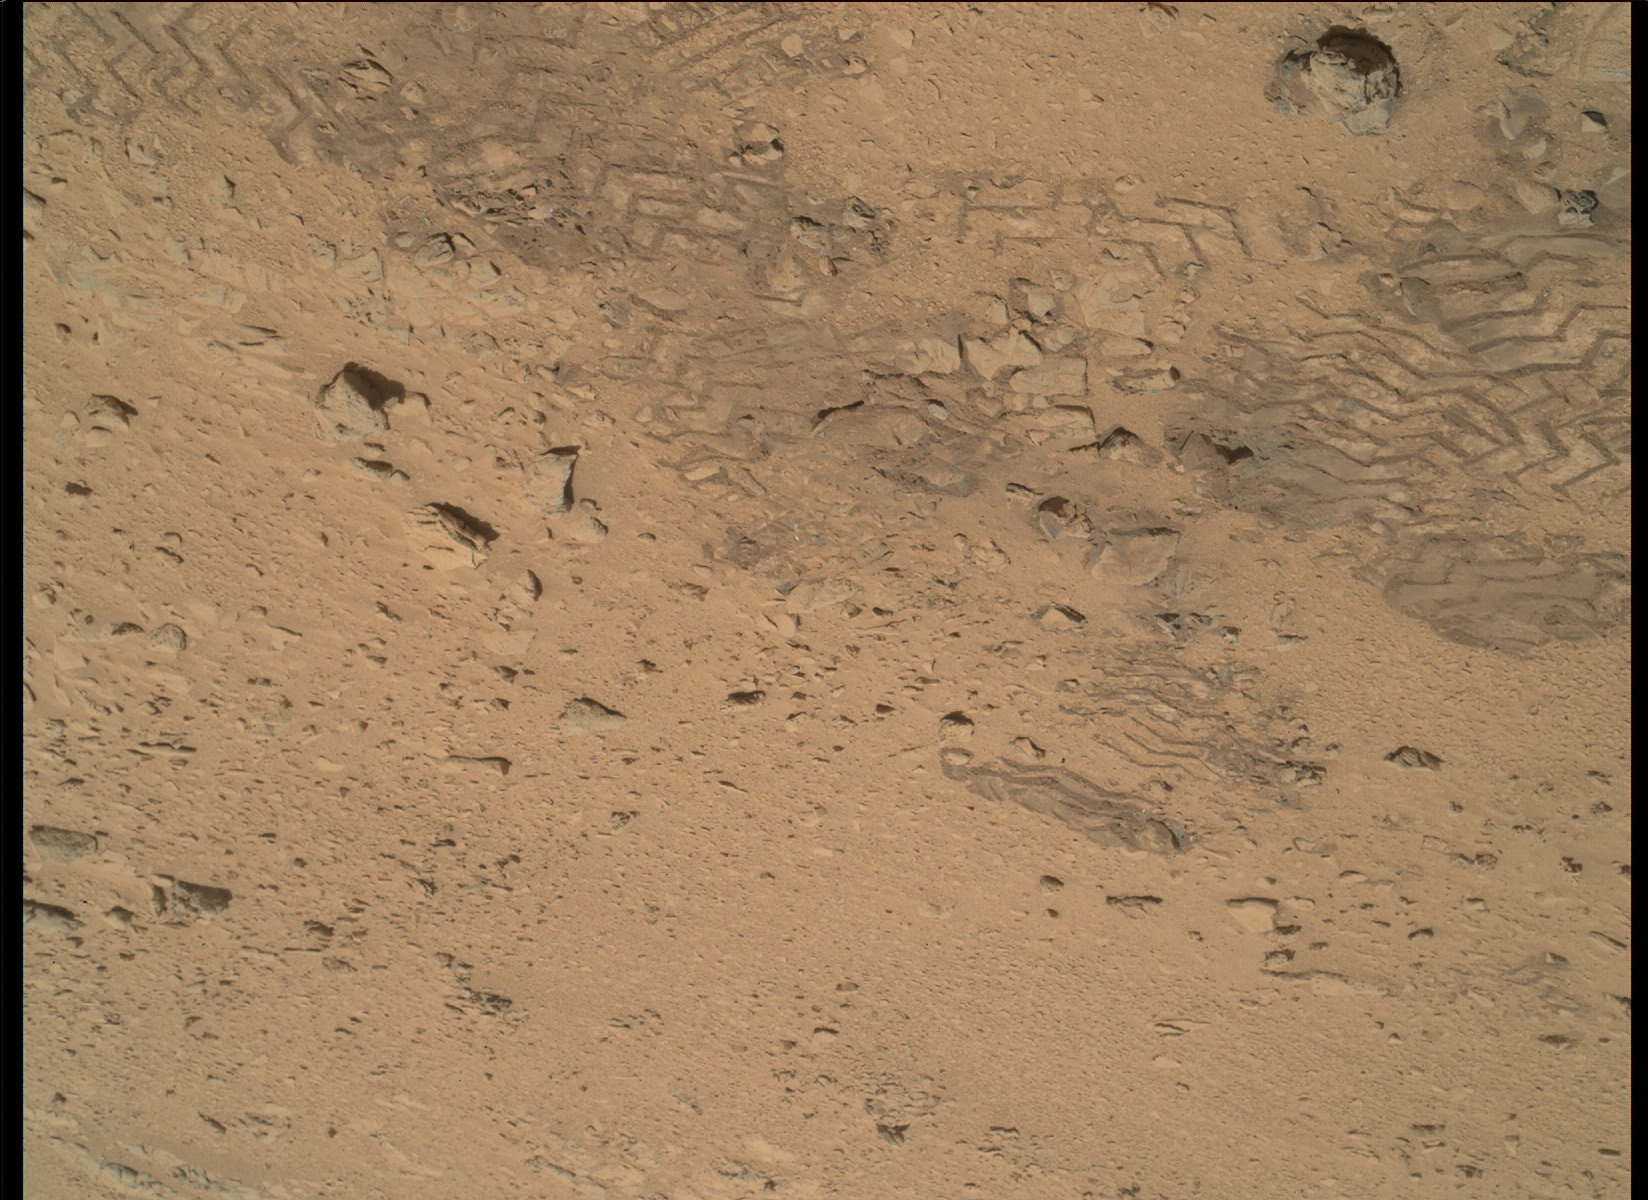 Nasa's Mars rover Curiosity acquired this image using its Mars Hand Lens Imager (MAHLI) on Sol 84